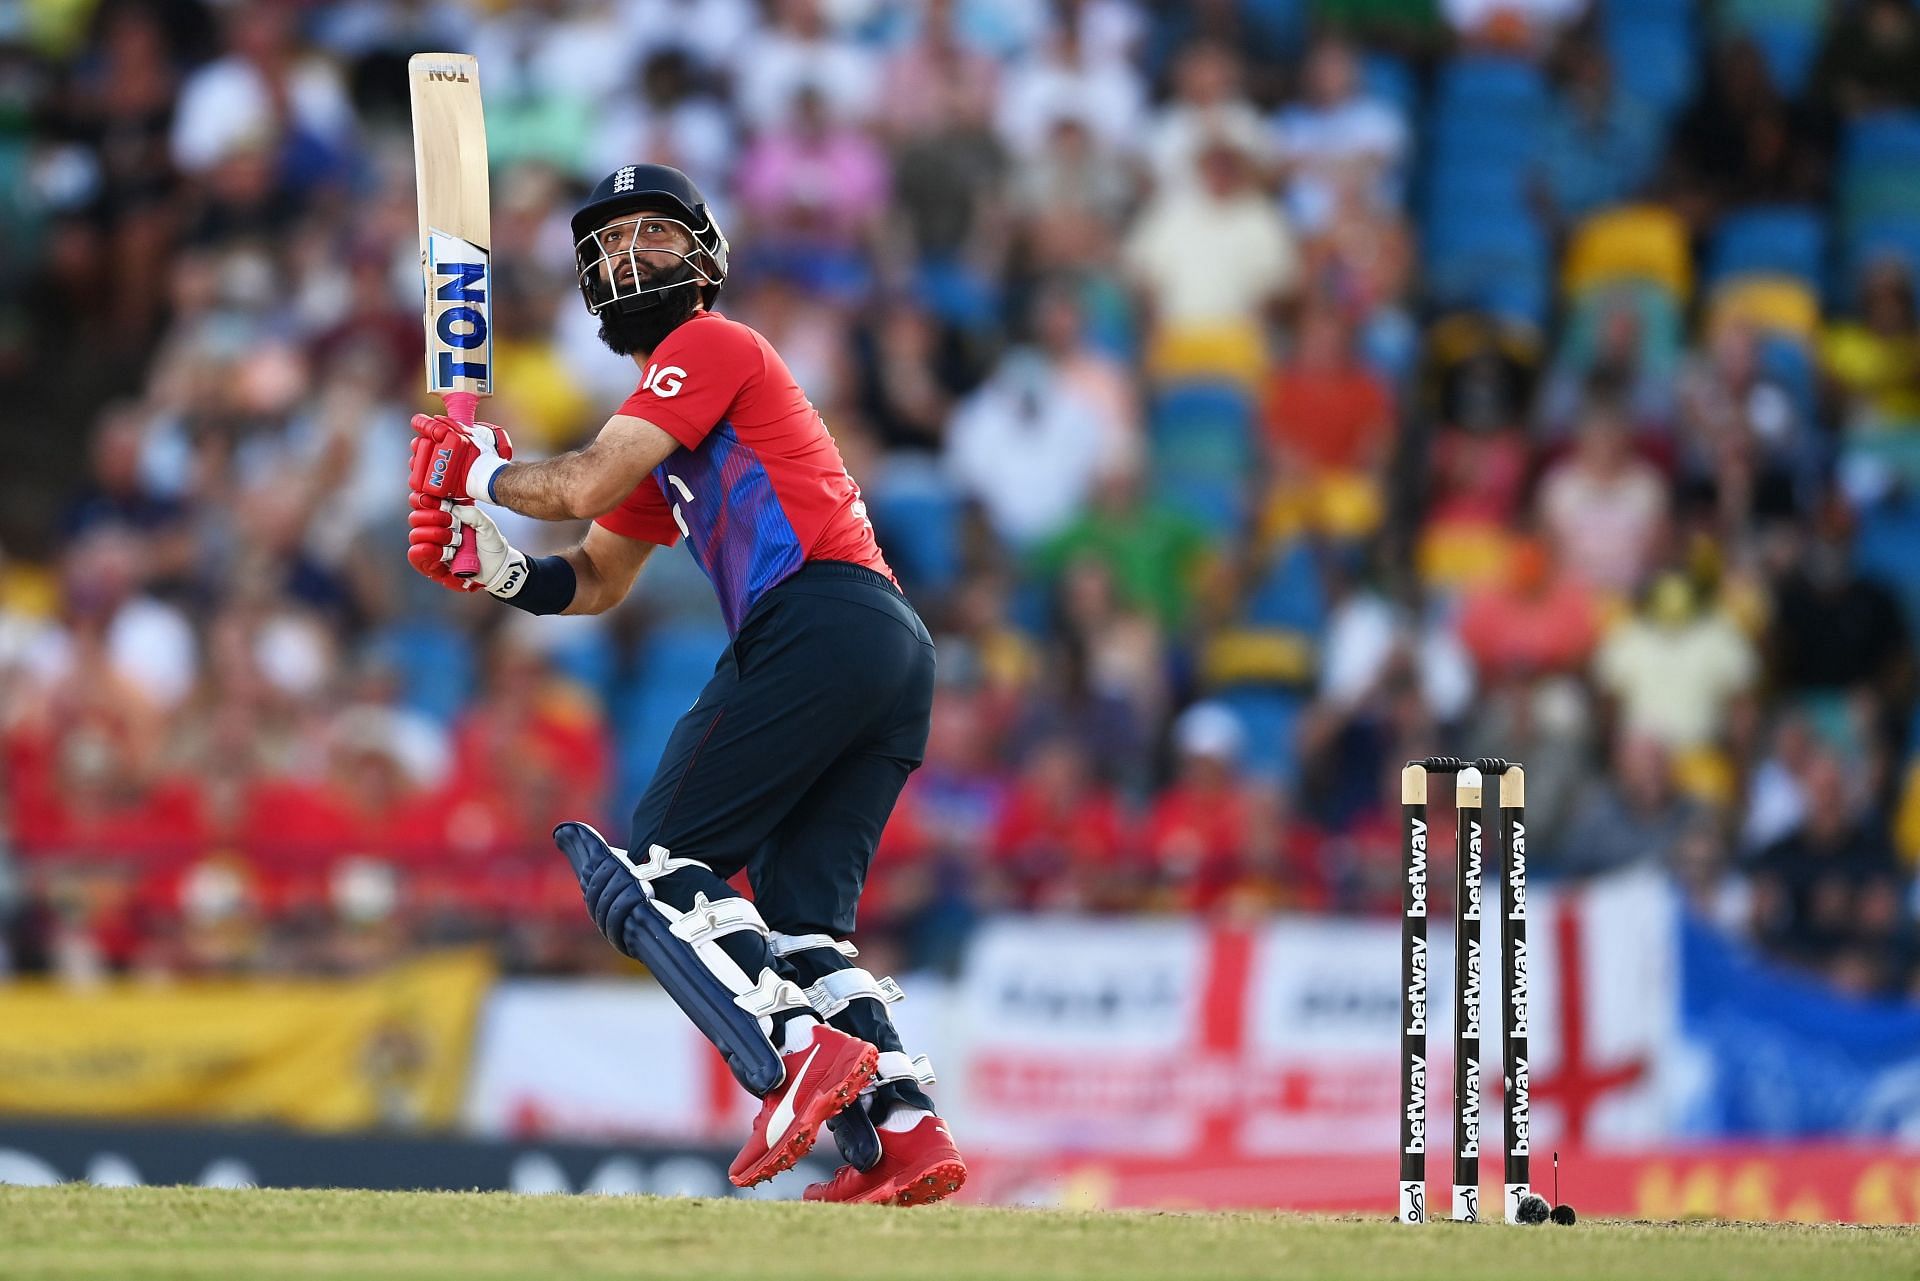 West Indies vs England - T20 International Series Fourth T20I